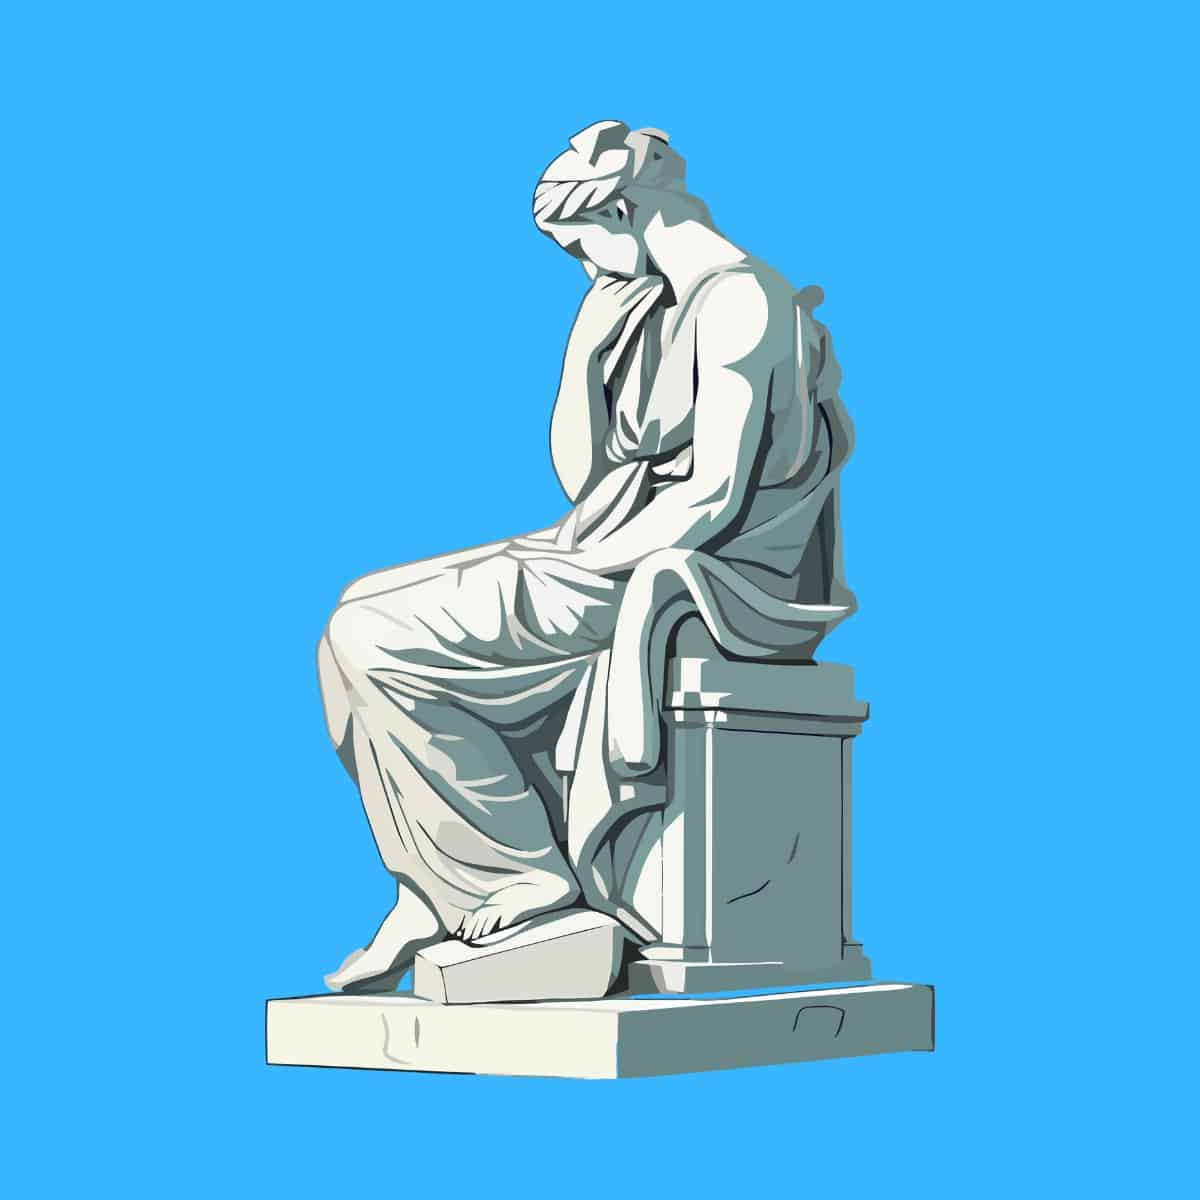 Cartoon graphic of a marble statue on a blue background.